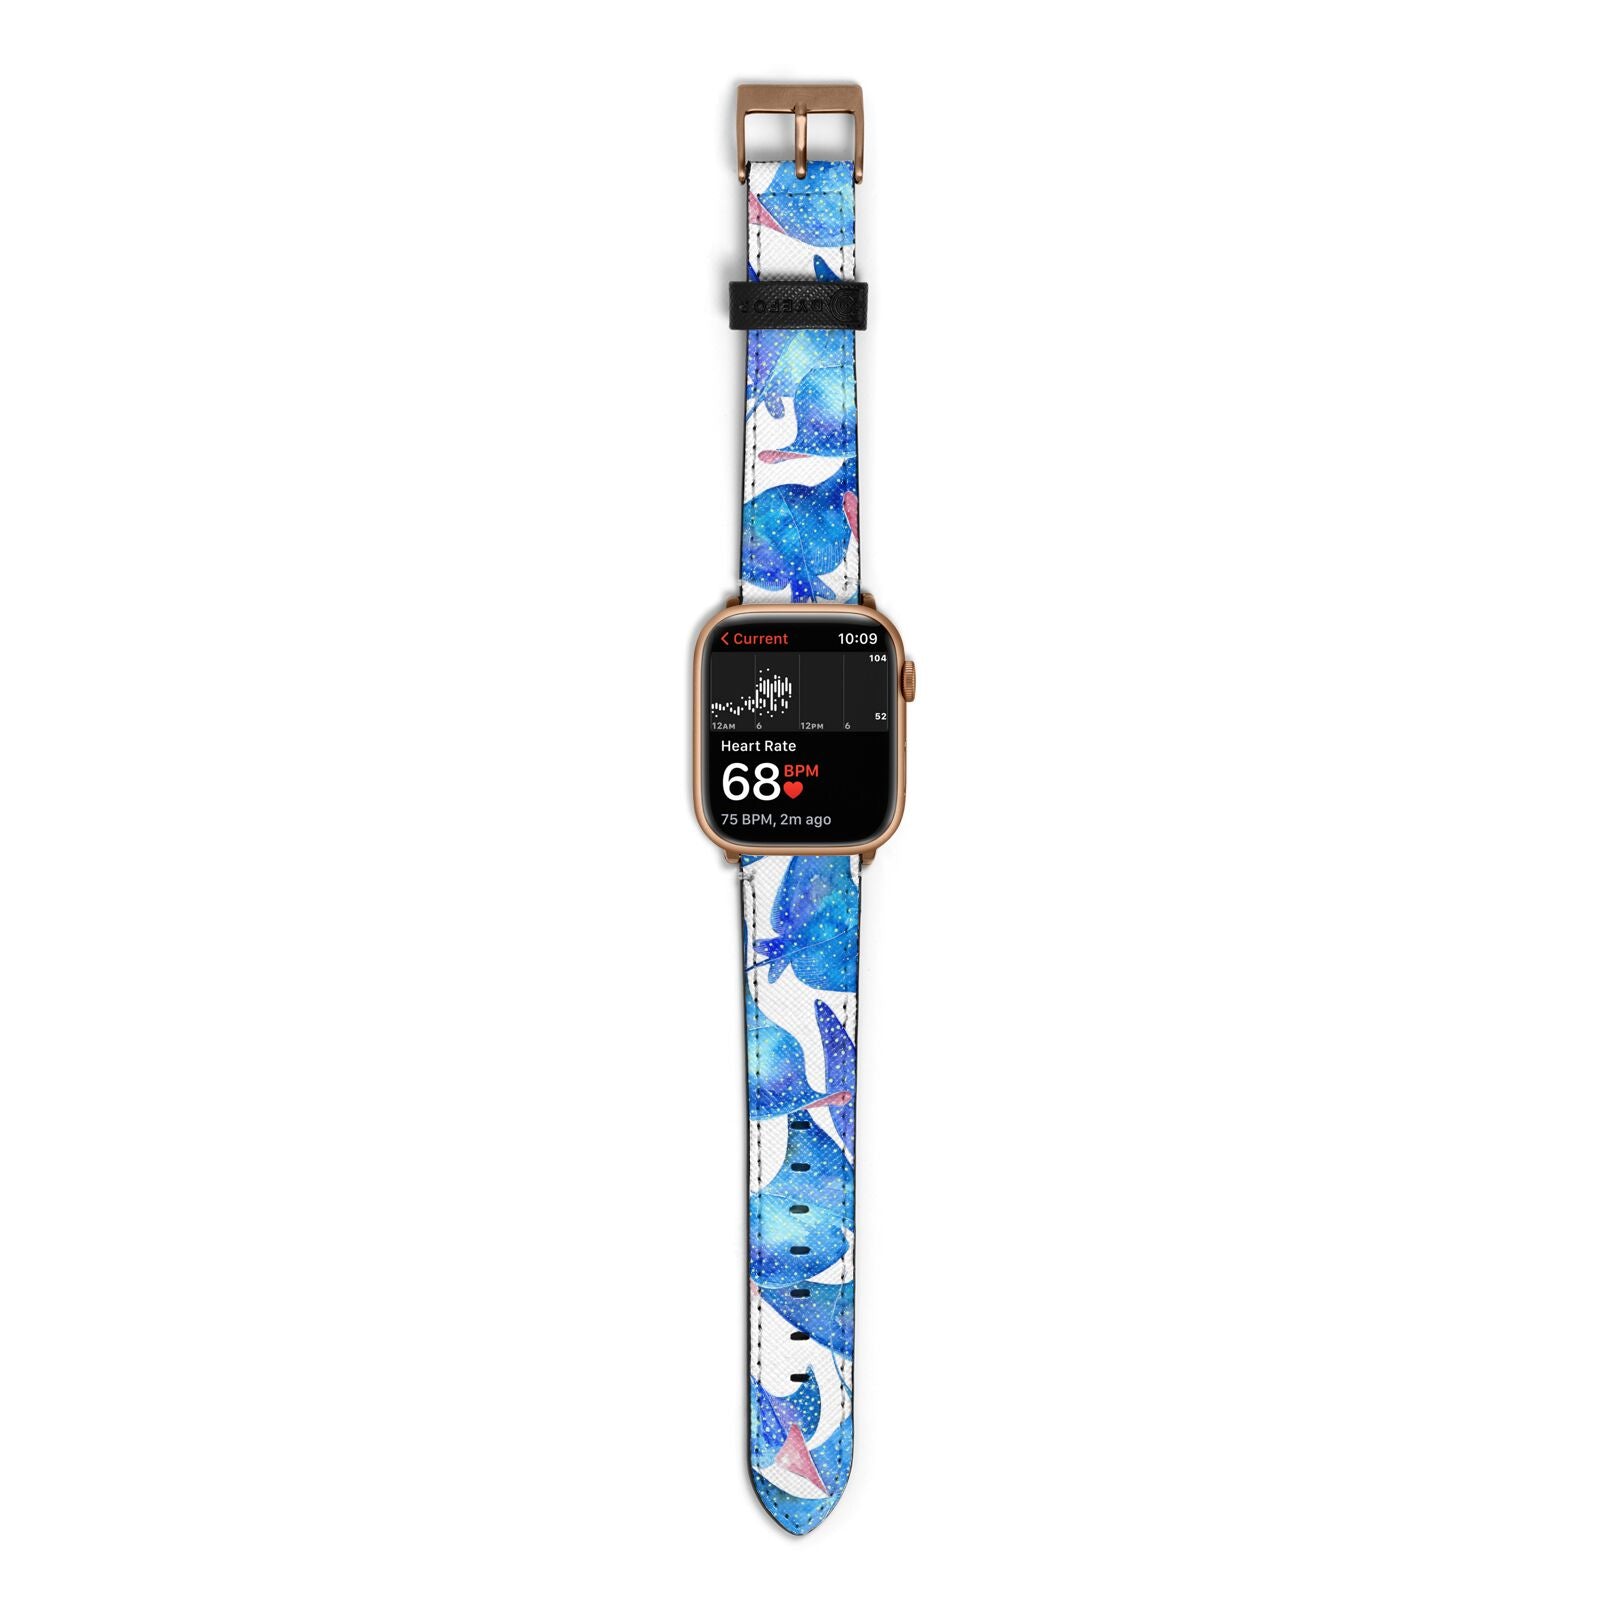 Devil Fish Apple Watch Strap Size 38mm with Gold Hardware